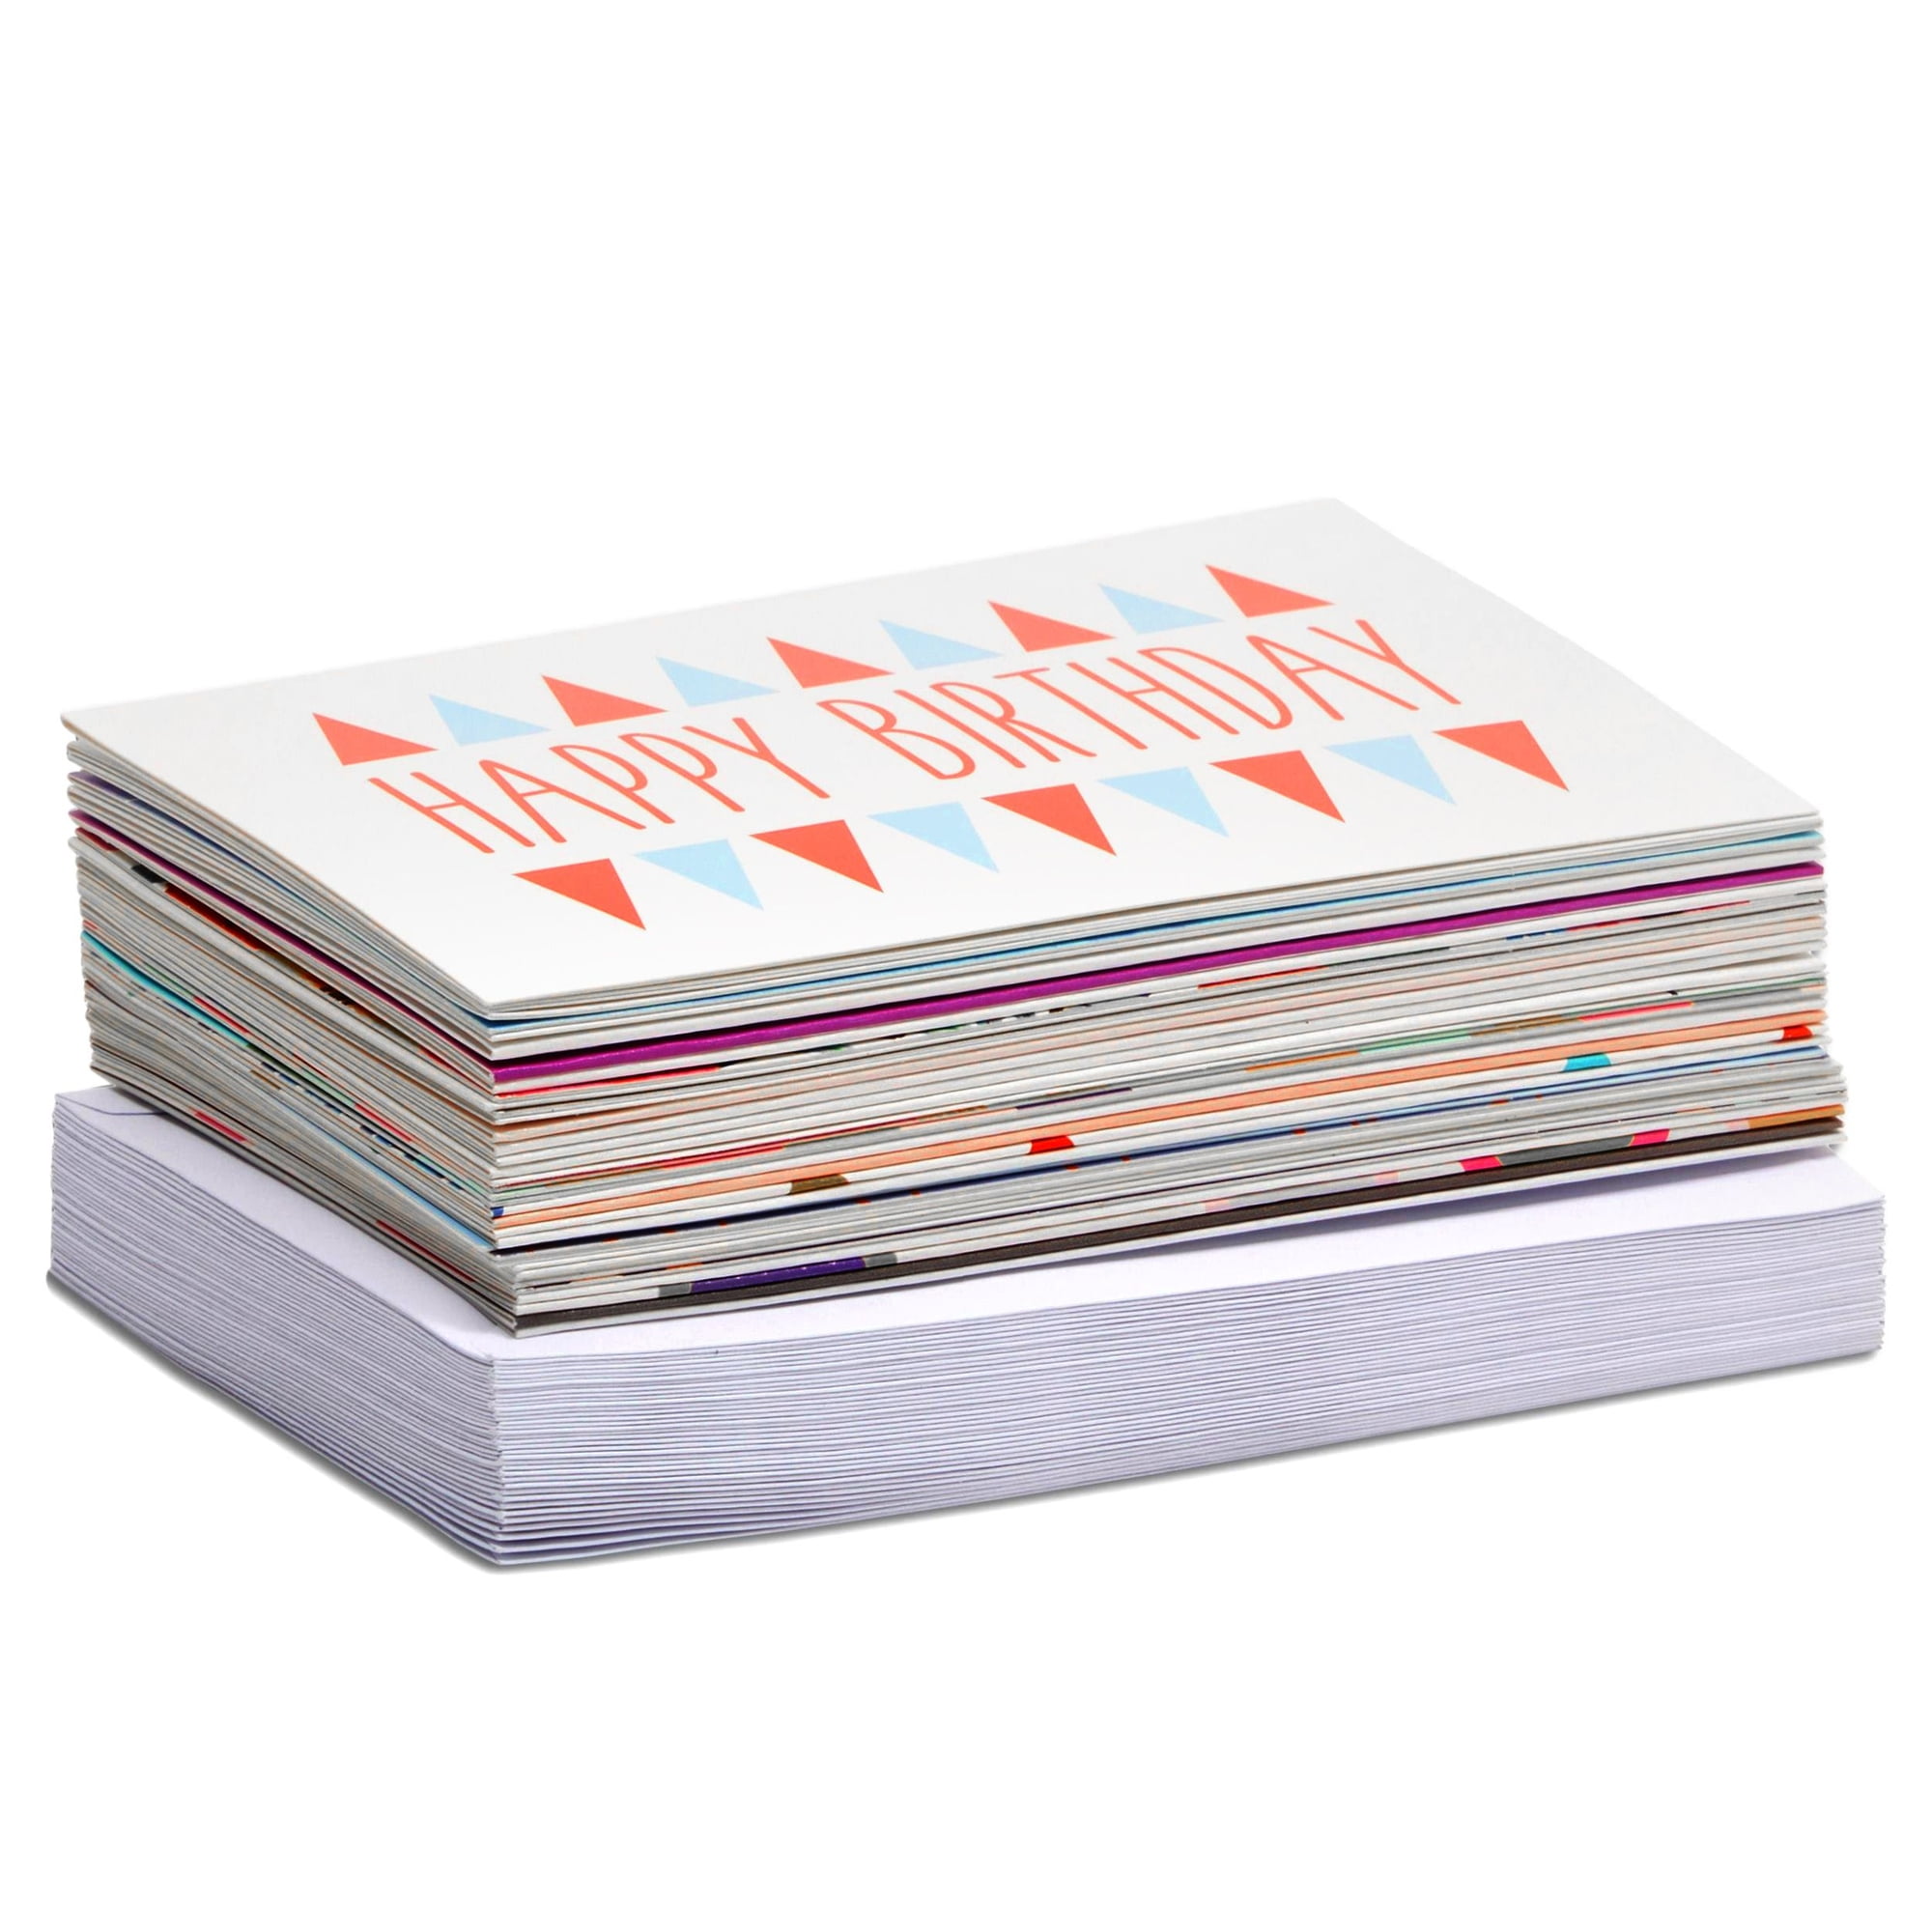 Better Office Birthday Cards with Envelopes 6 x 4 Multicolor 100/Pack (64531)